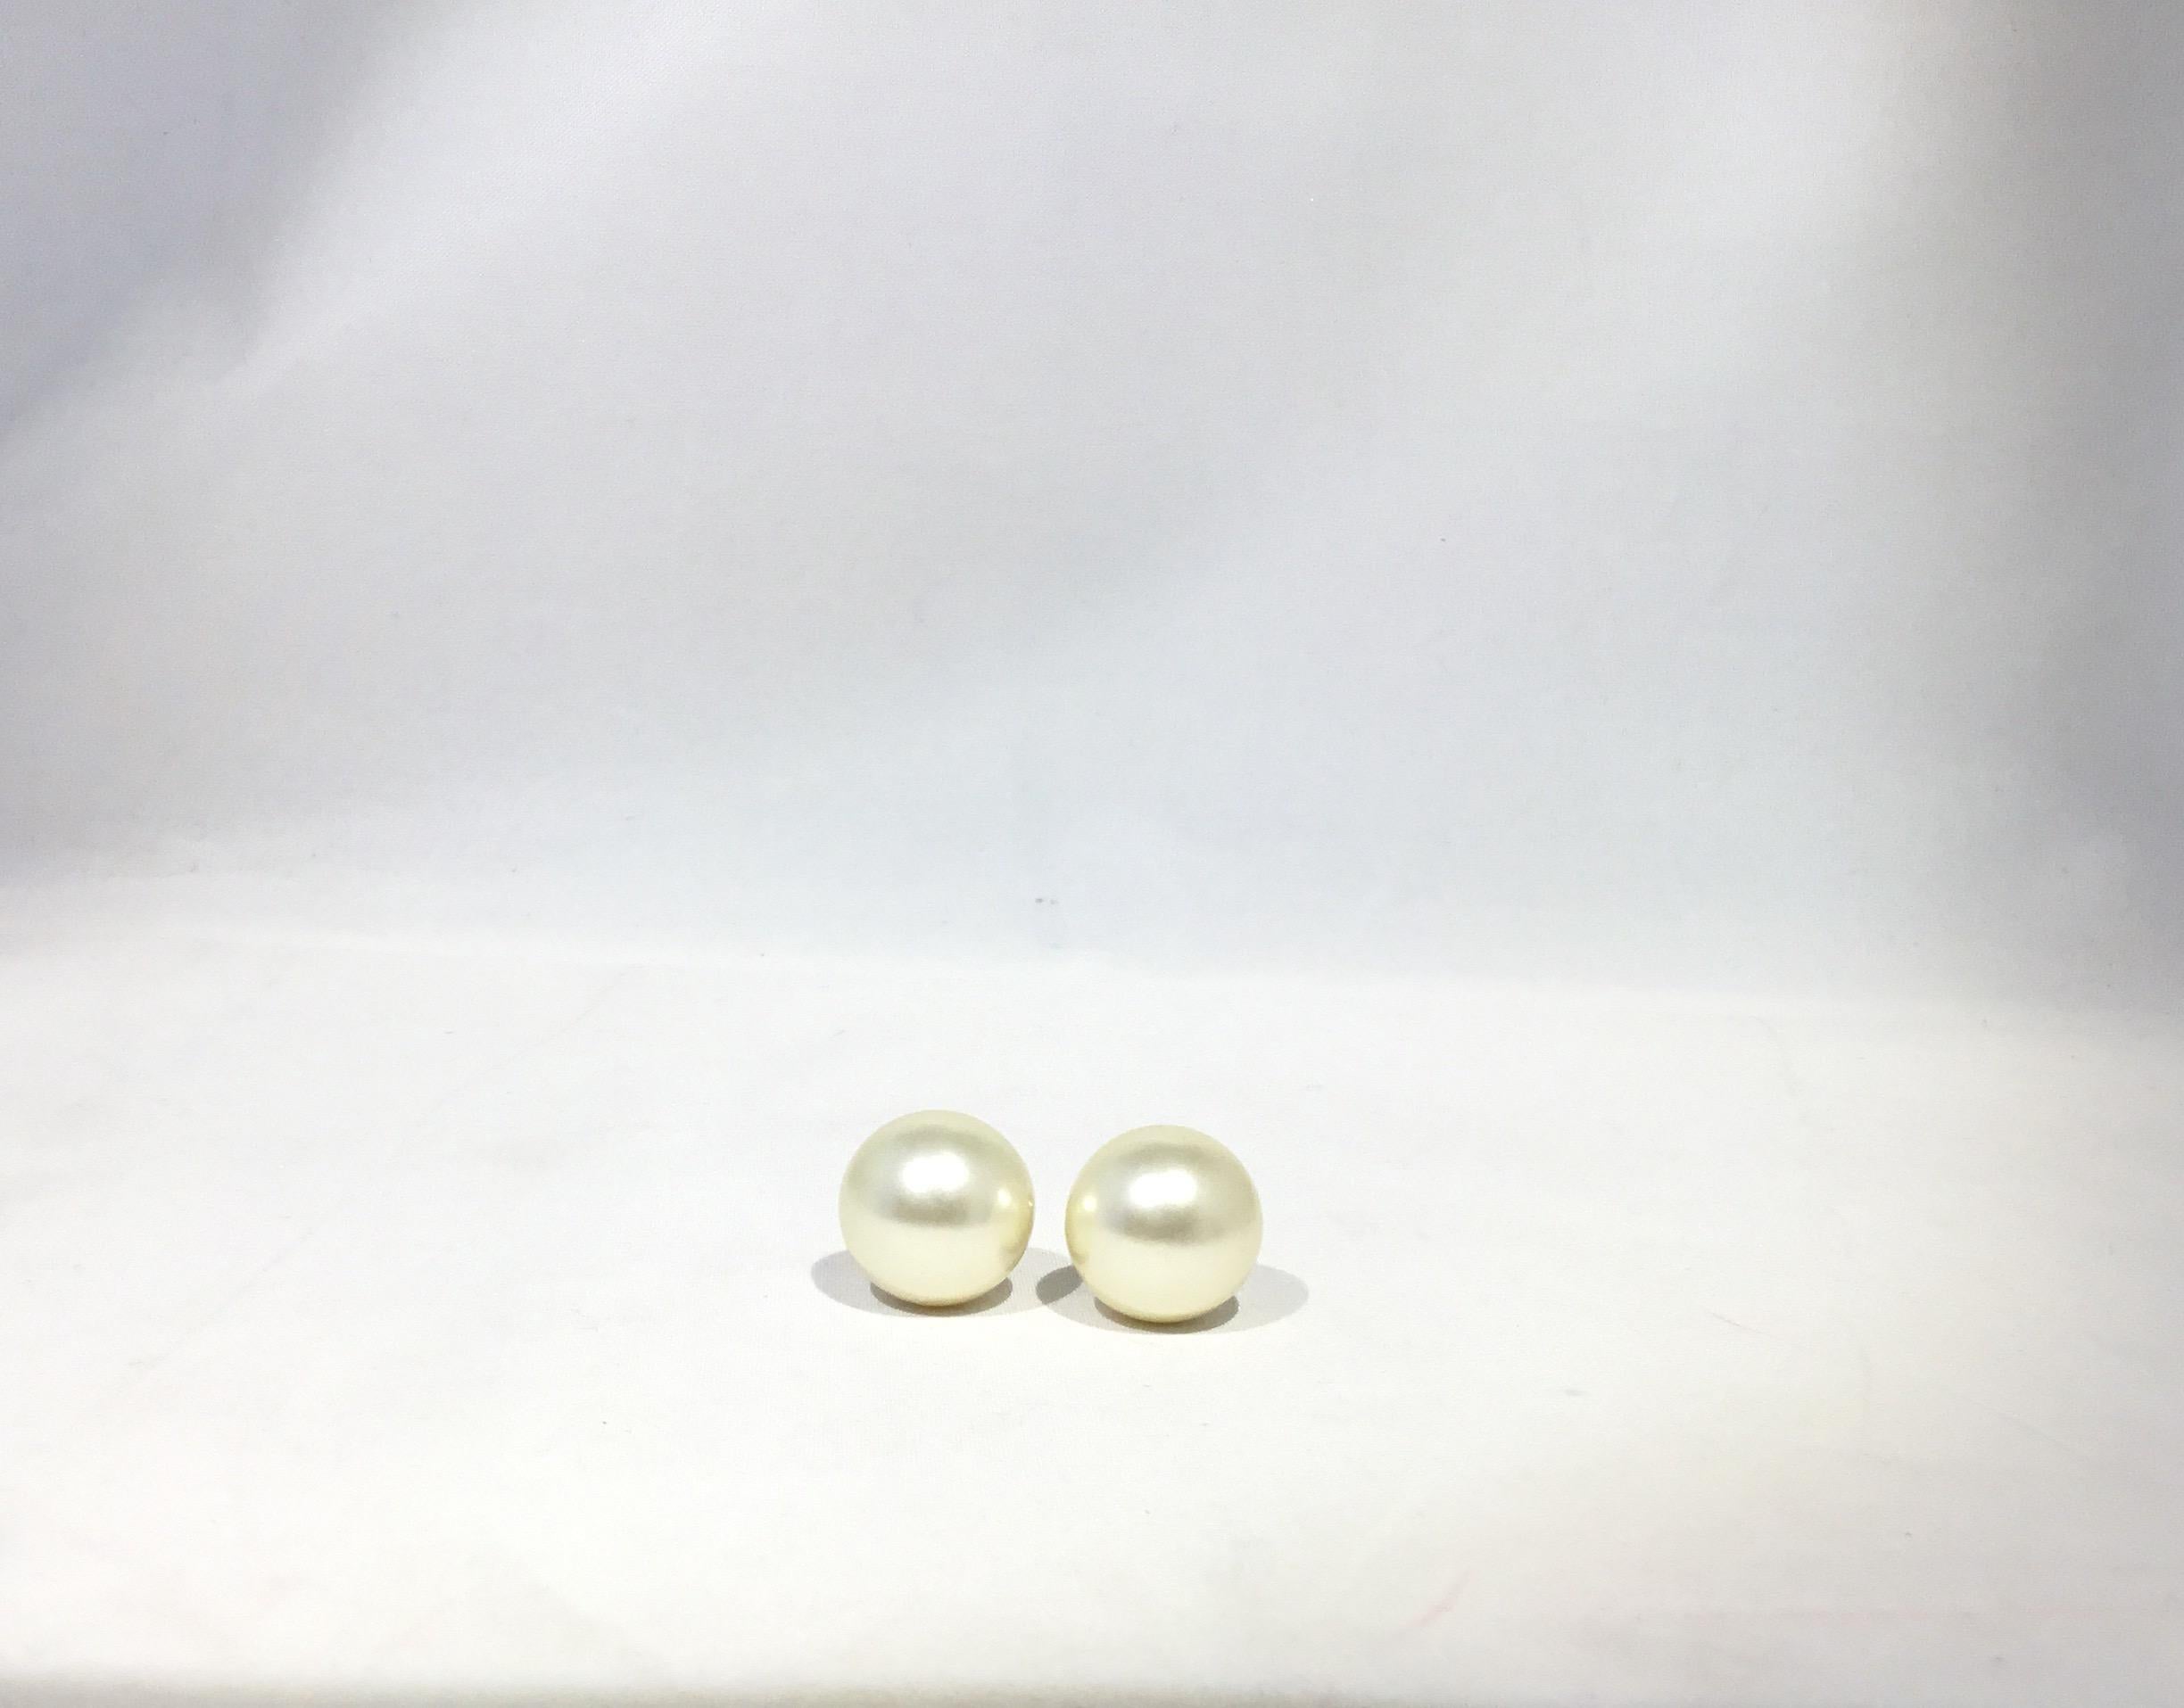 CHRISTIAN DIOR Pearl Mise En Dior Tribal Earrings or 100% of your money back. The asymmetrical tribal inspired earrings feature a small faux pearl set on gold metal that rests on the ear, whilst the larger faux pearl is slightly visible from behind